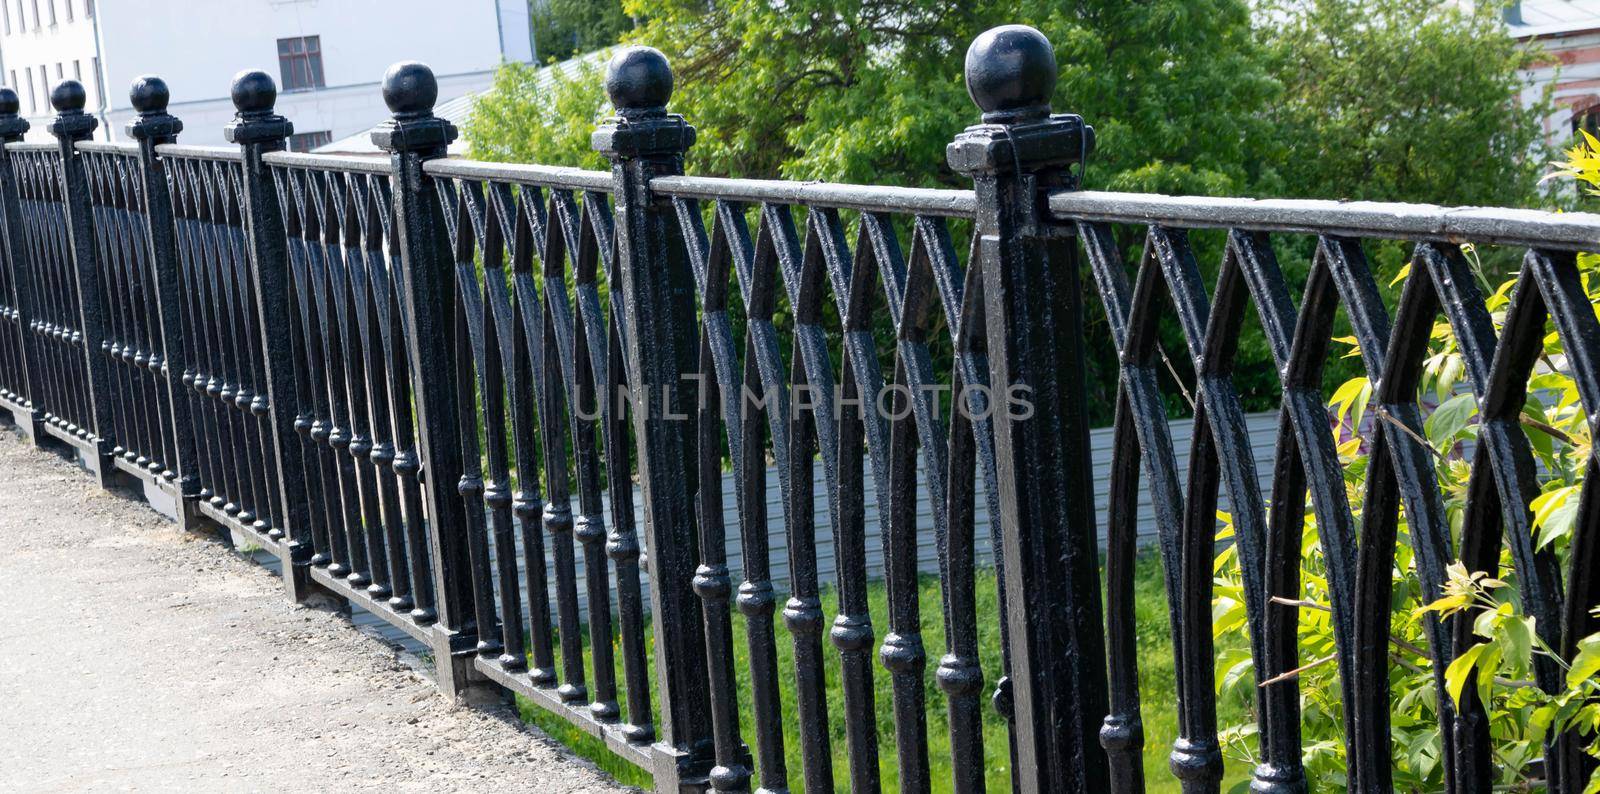 Black forged fence on a granite base.